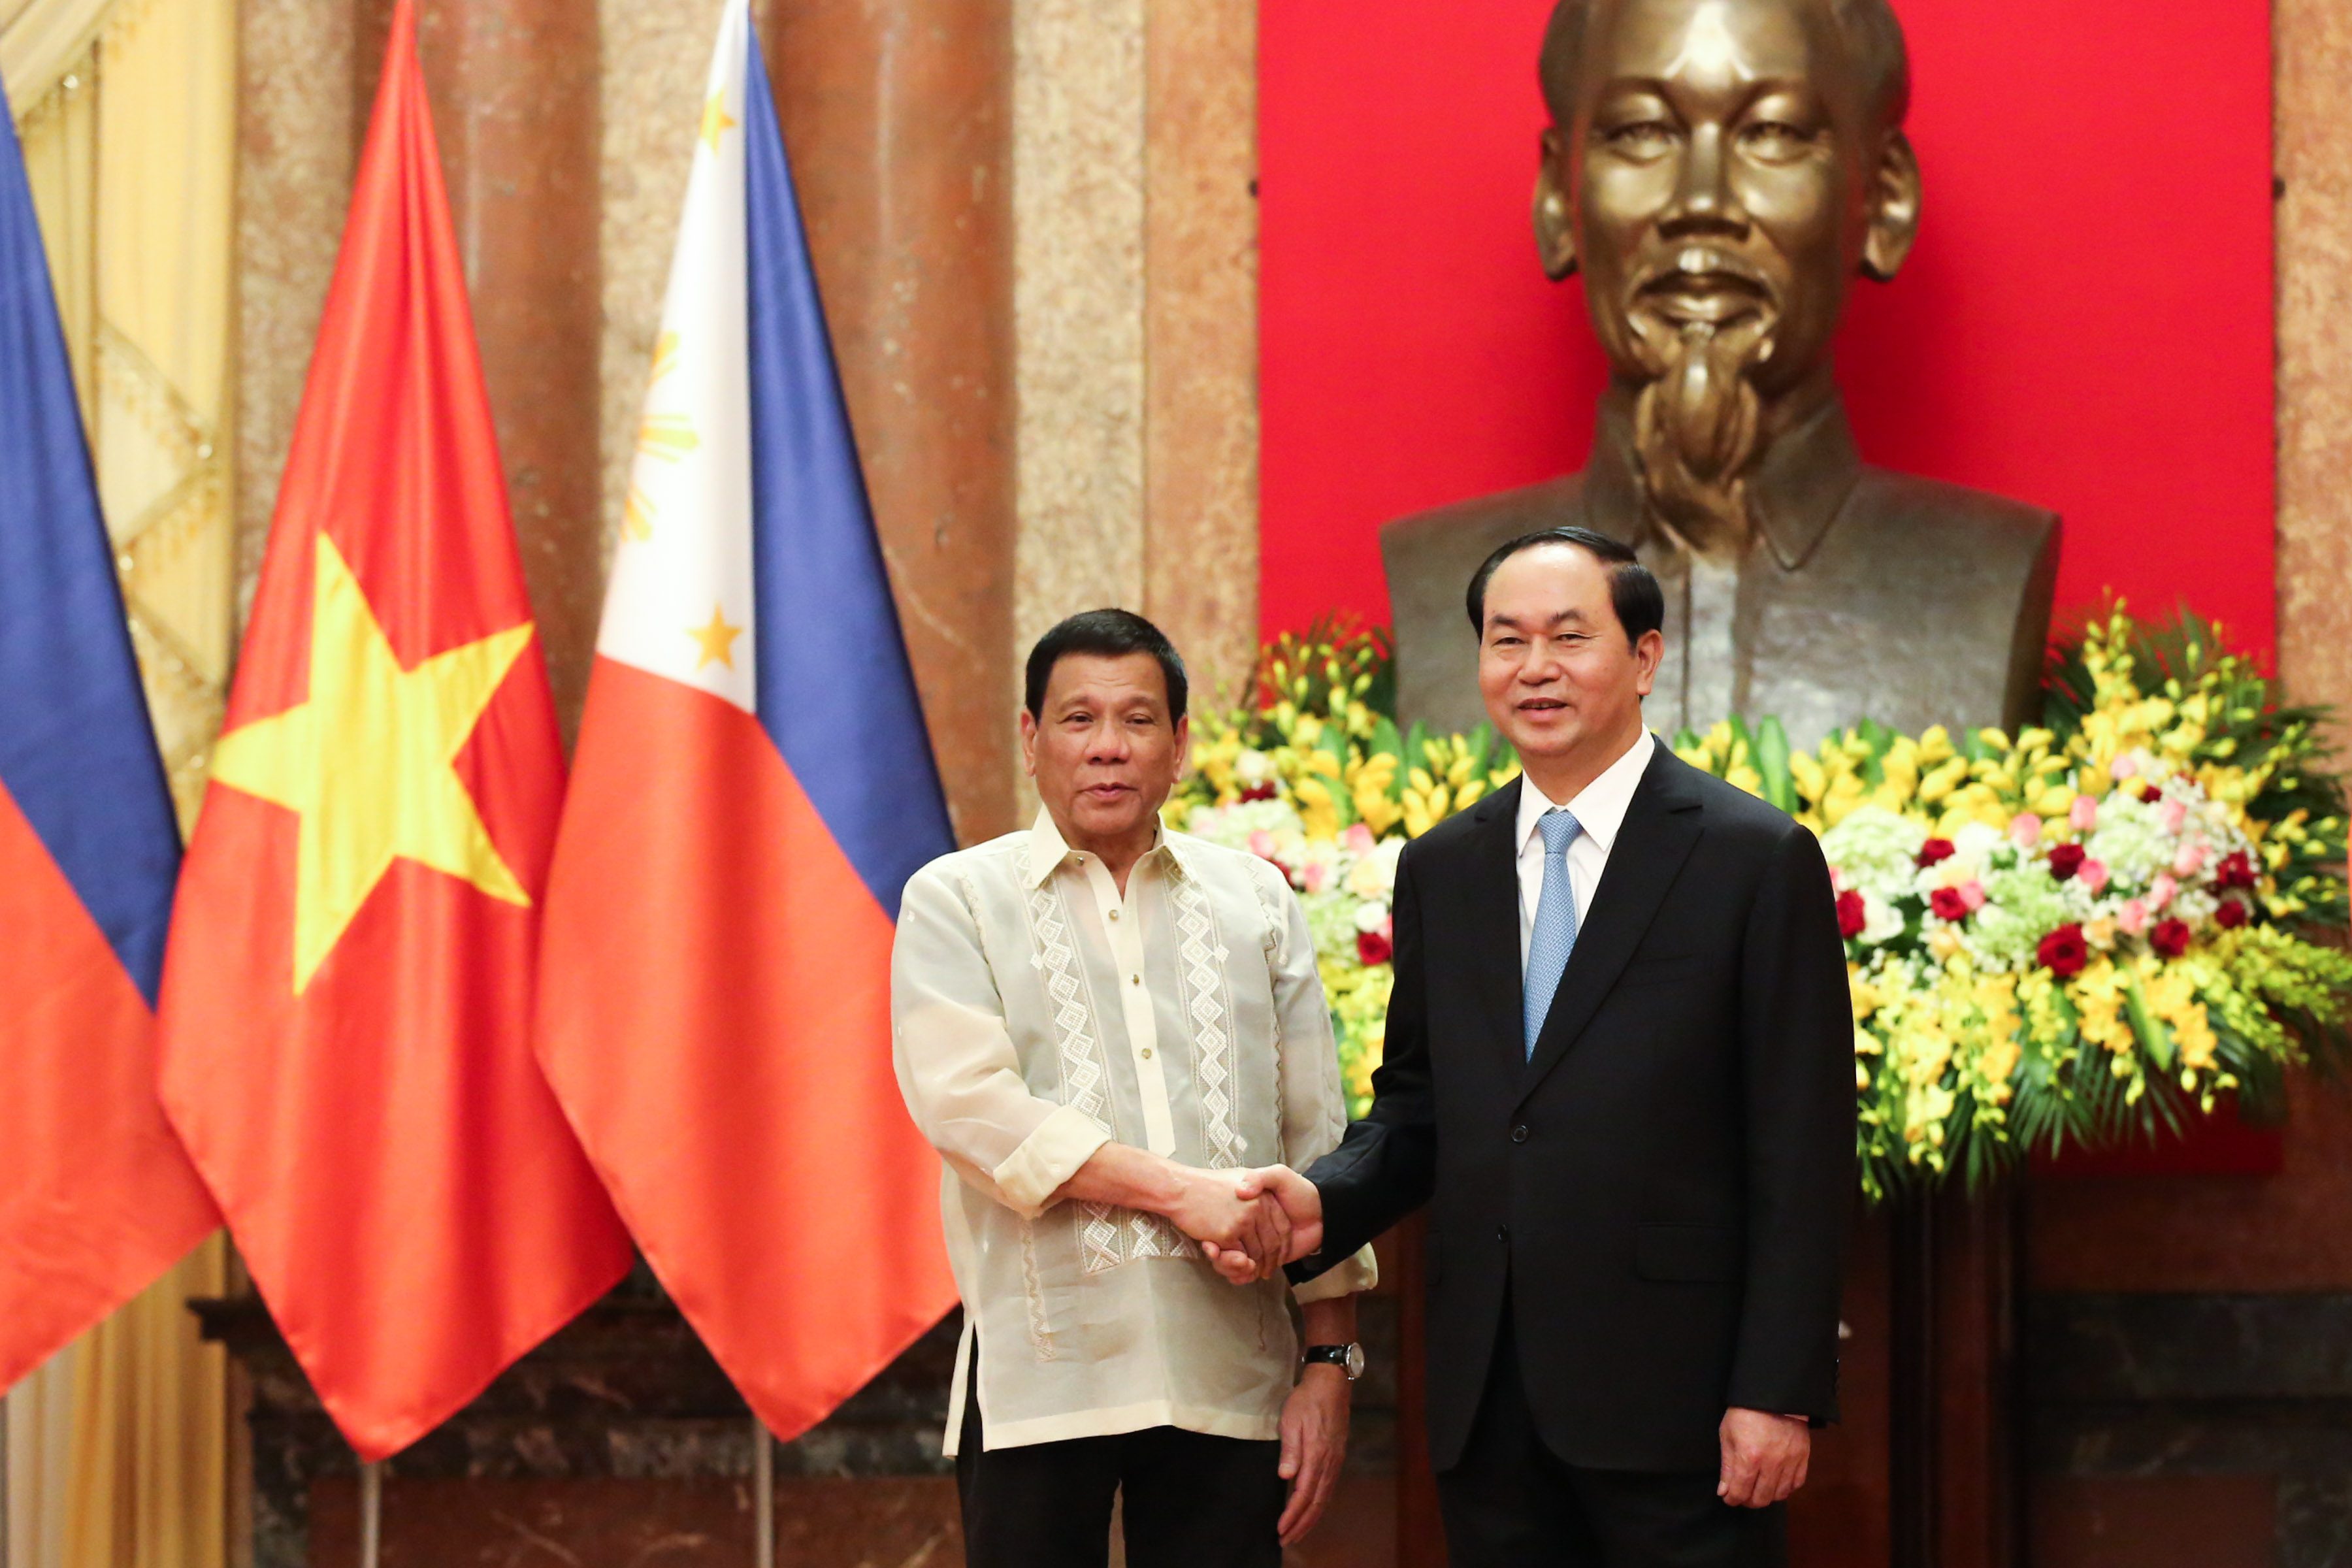 AFFIRMING TIES. President Rodrigo Duterte shakes hands with Vietnamese President Tran Dai Quang at the State Palace in Hanoi on September 29, 2016 